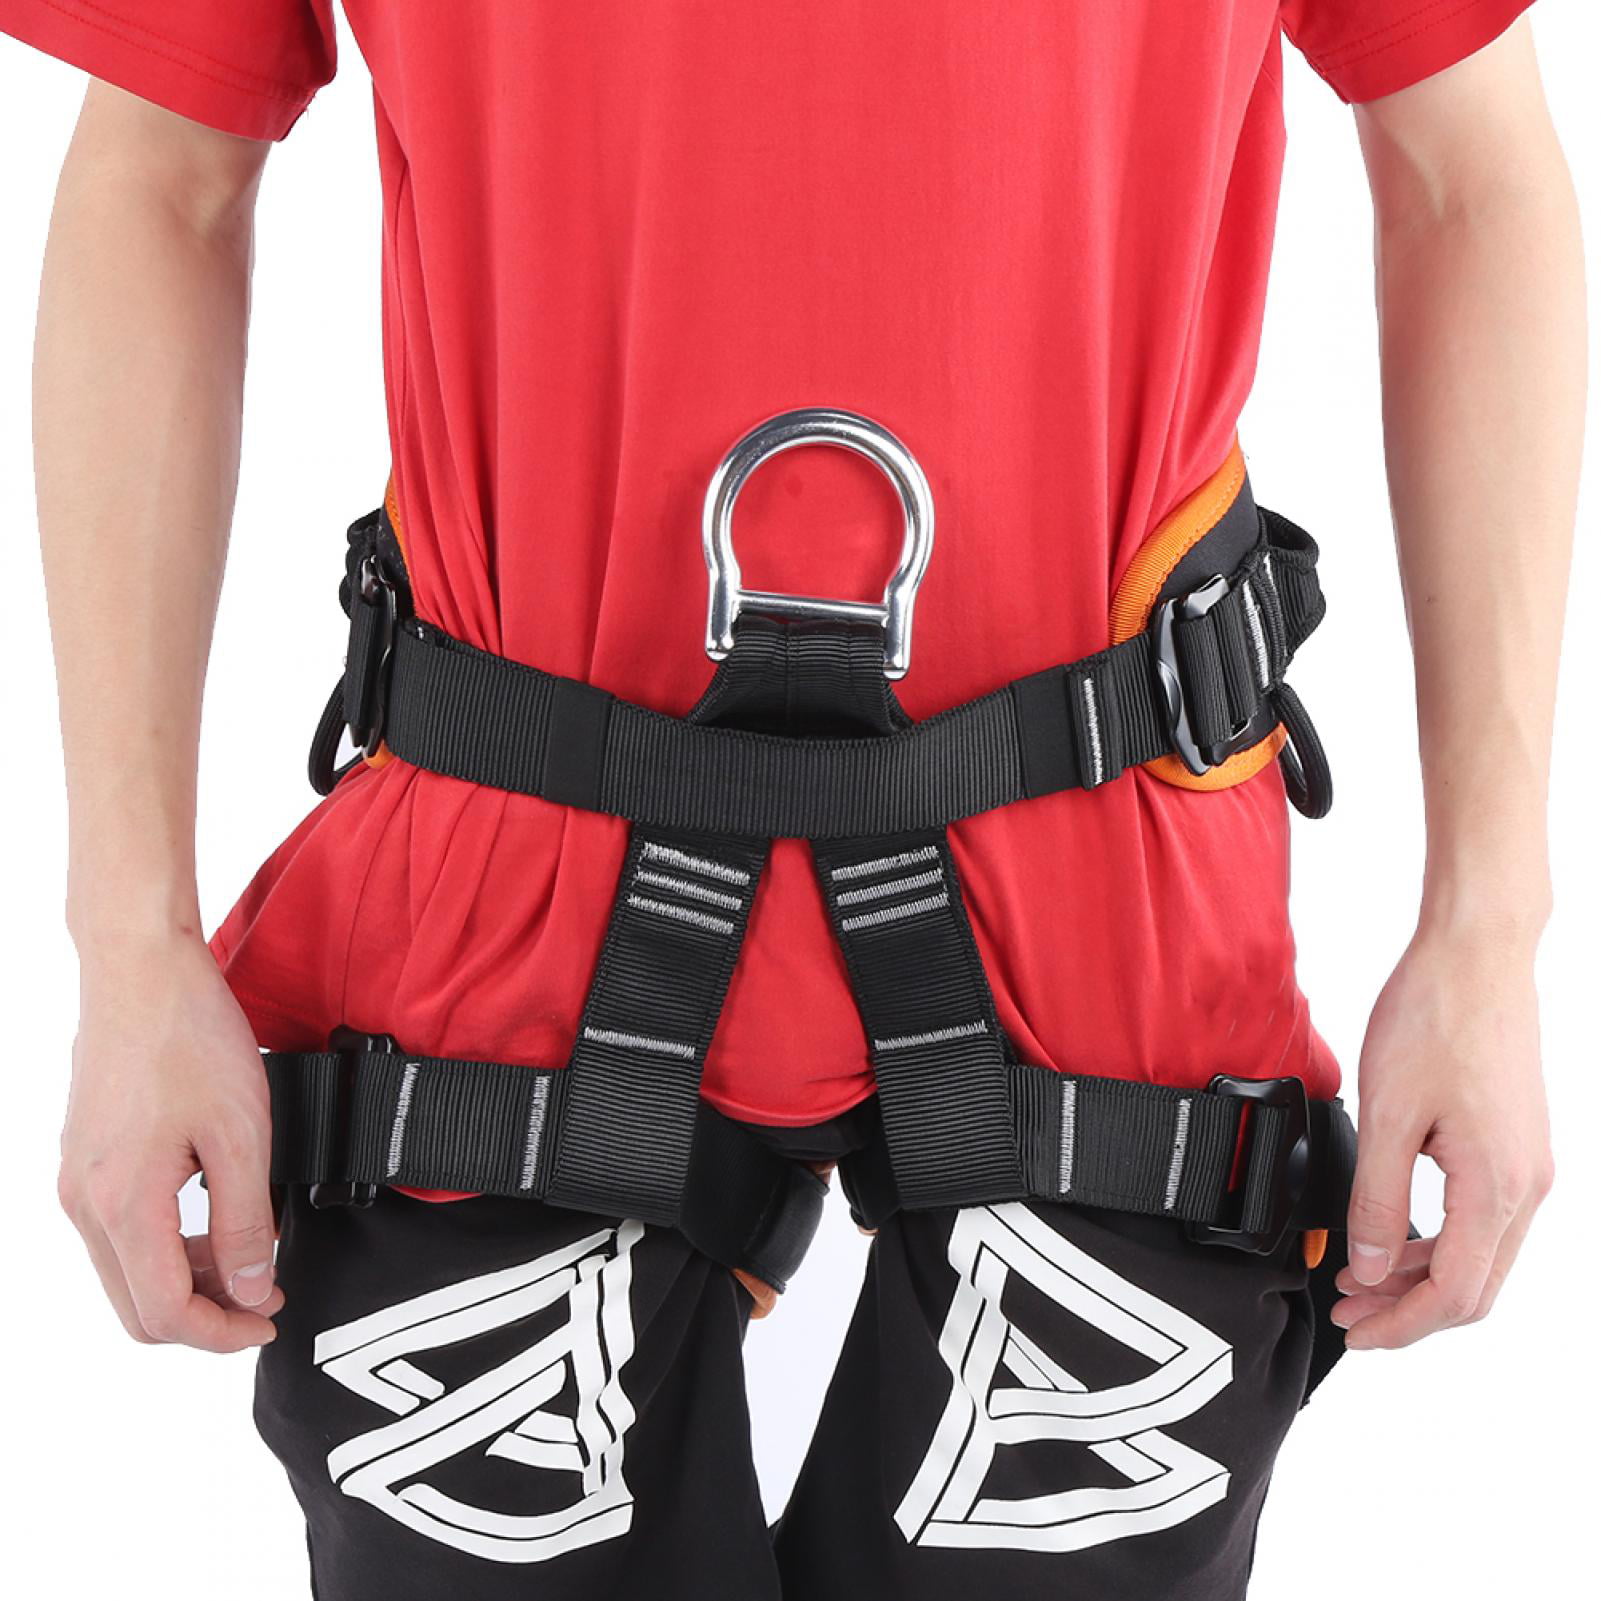 K6R6 Outdoor Rescue Rock Climbing Belt Safety Rappelling Harness Adjustable HOT 